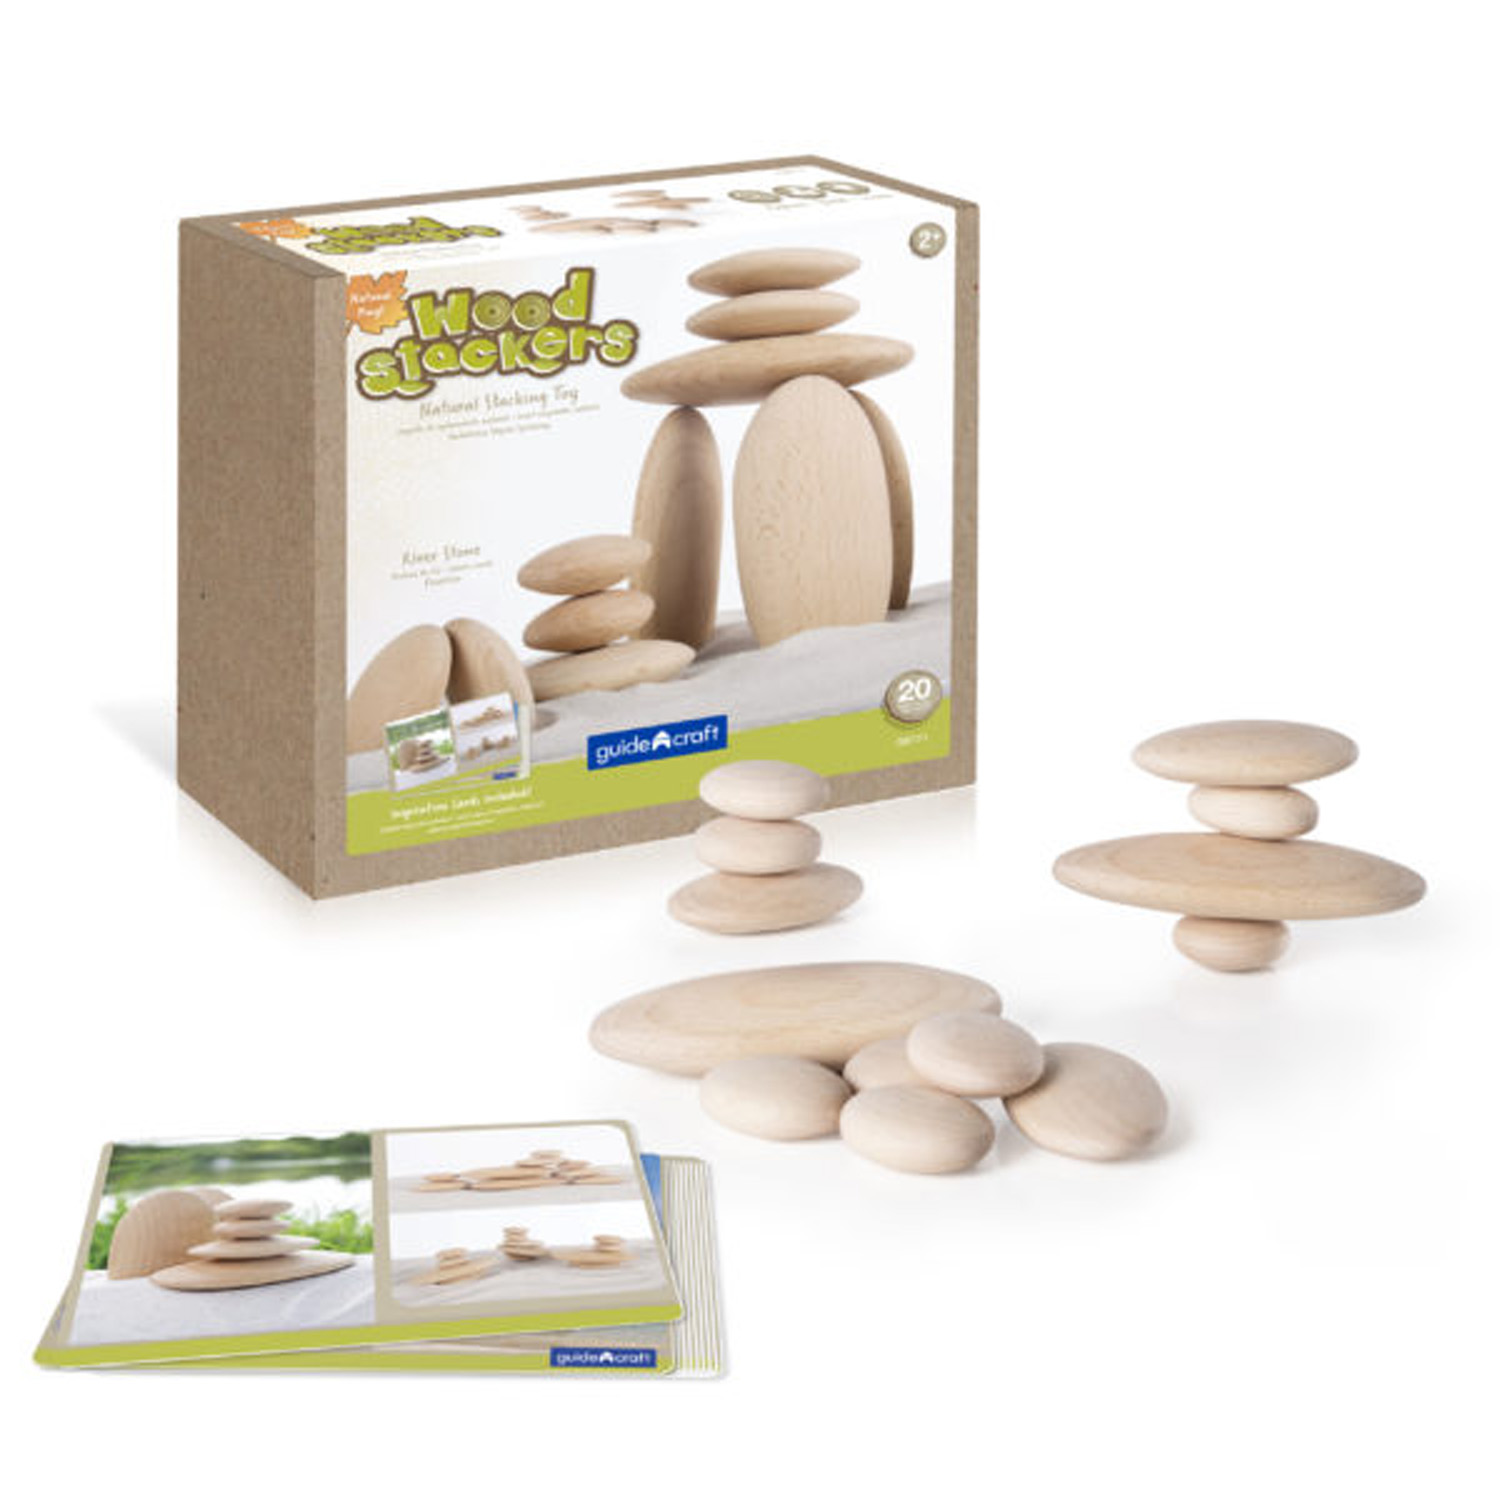 Guidecraft Wood Stackers - River Stones, 20 Pieces image number null